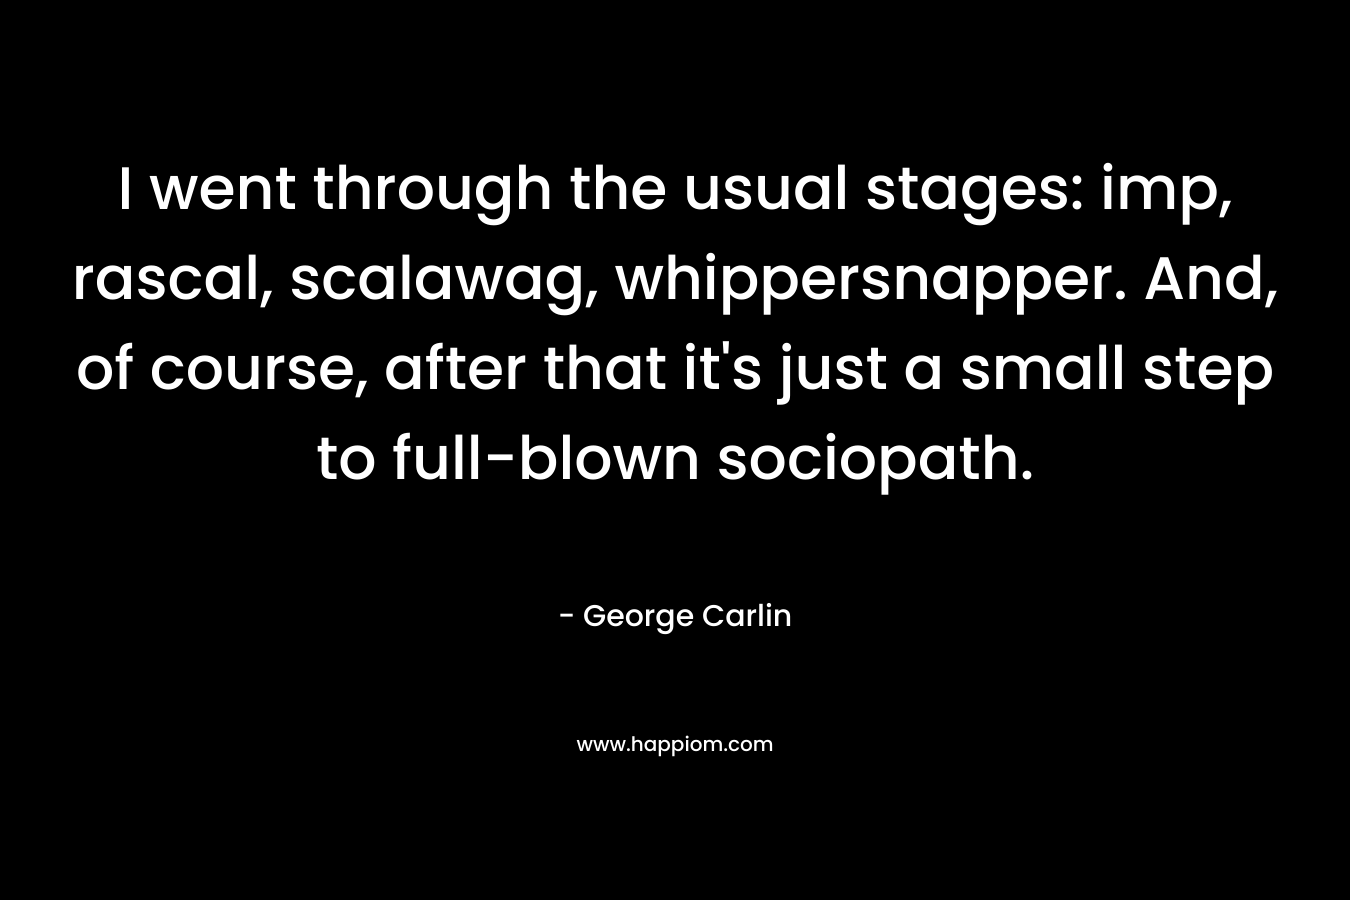 I went through the usual stages: imp, rascal, scalawag, whippersnapper. And, of course, after that it’s just a small step to full-blown sociopath. – George Carlin